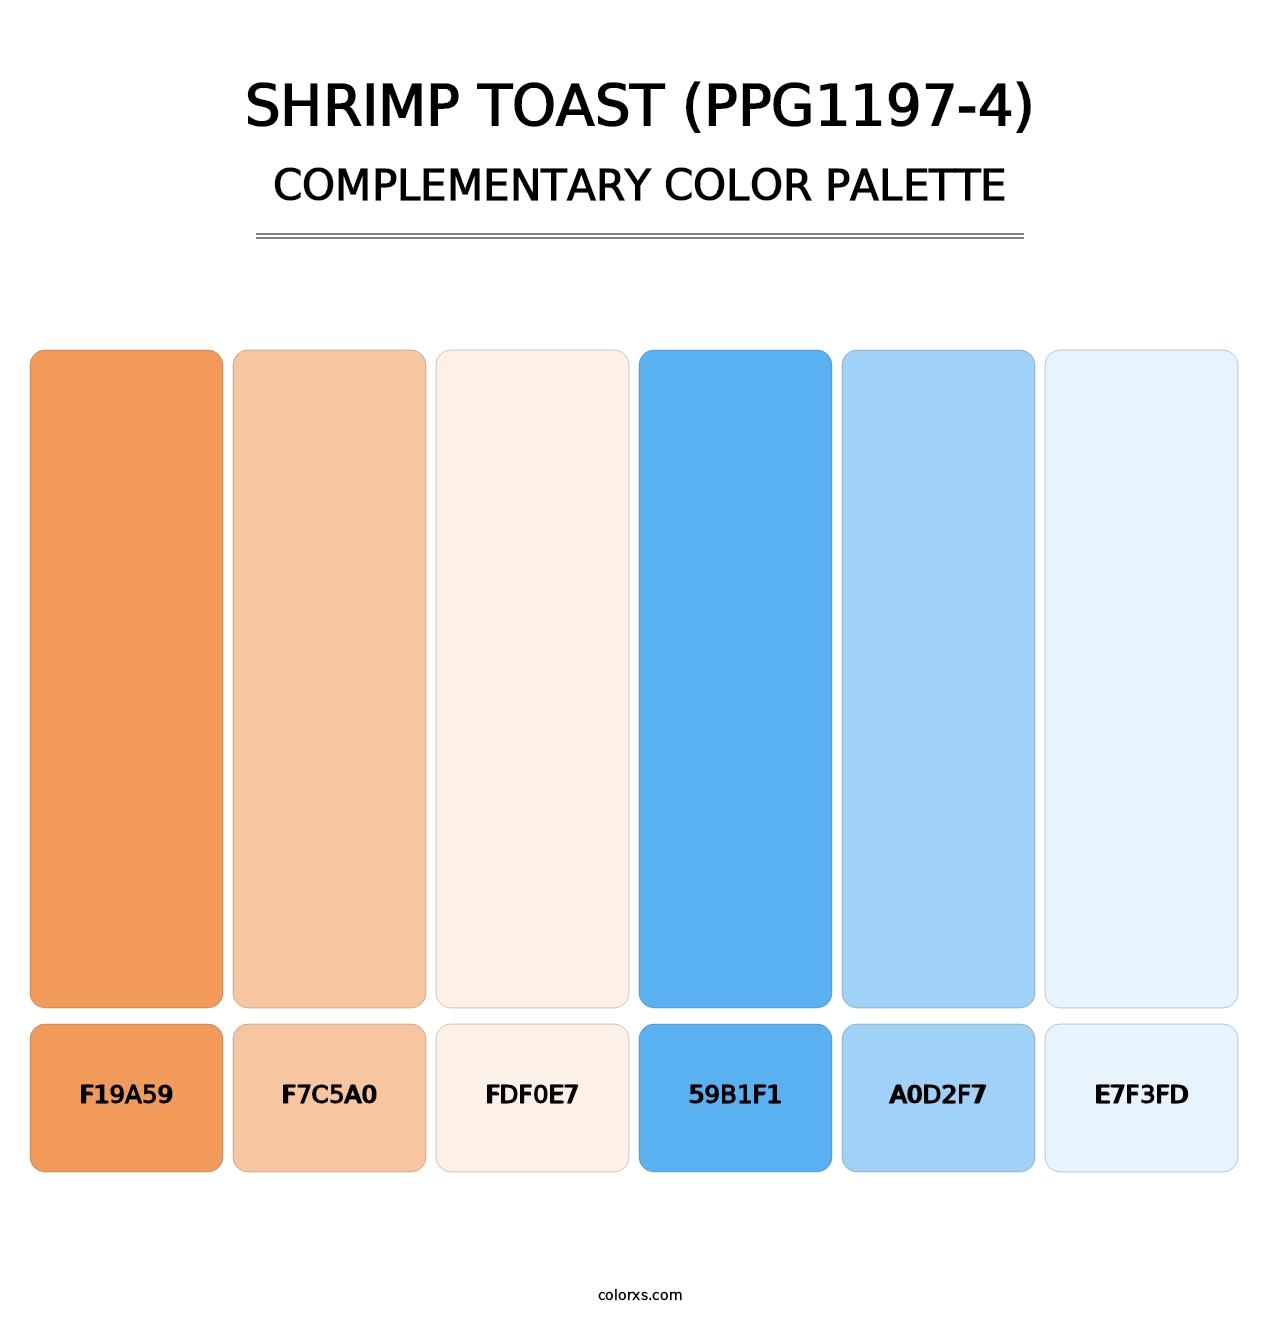 Shrimp Toast (PPG1197-4) - Complementary Color Palette